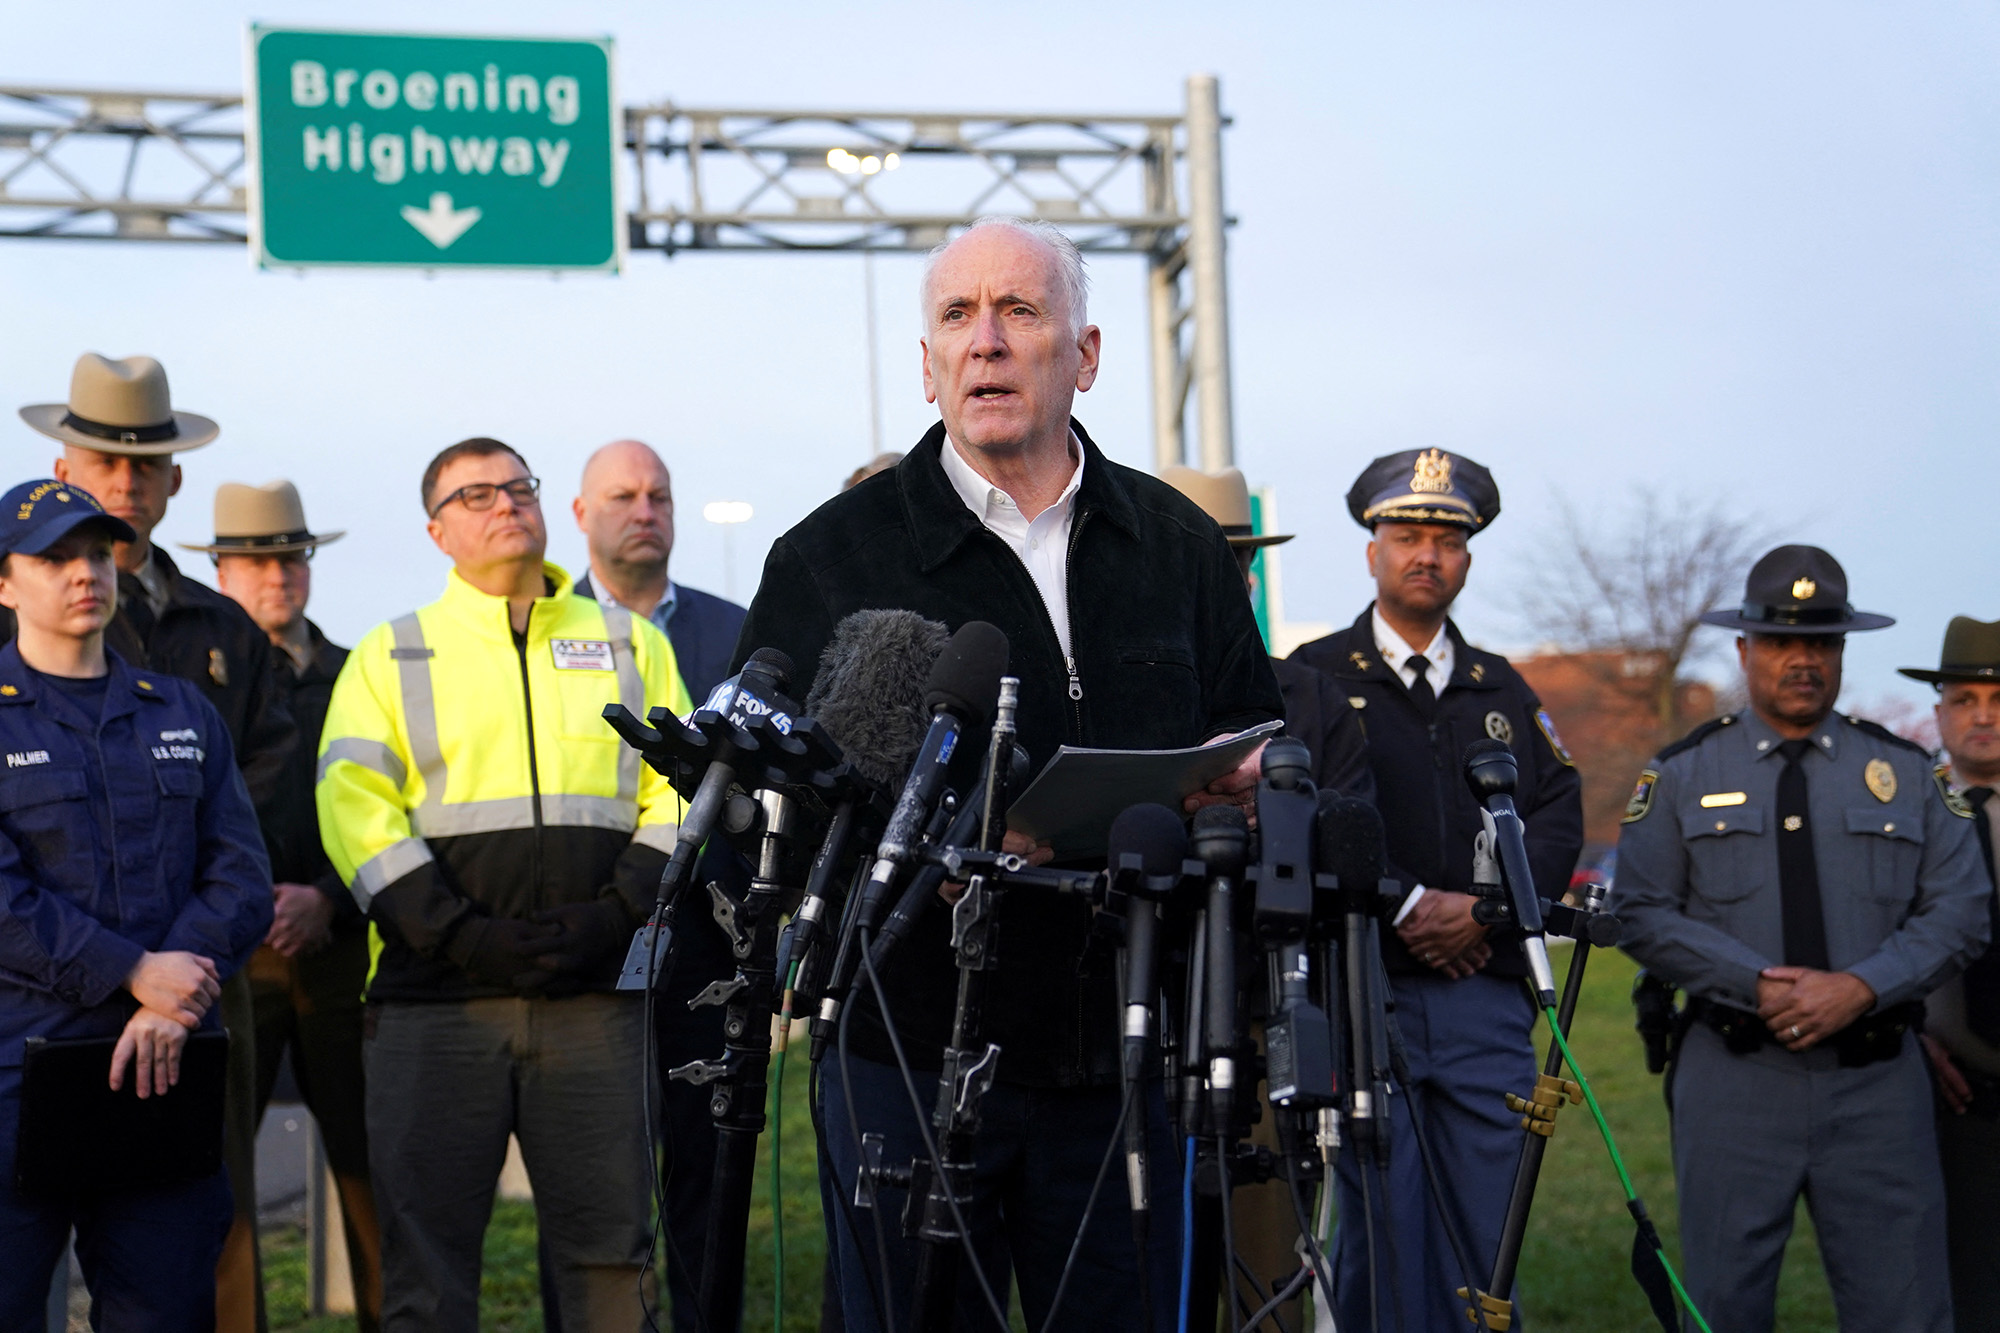 Maryland Transportation Secretary Paul J. Wiedefeld speaks during a press conference, following the collapse of the Francis Scott Key Bridge, in Baltimore, Maryland, on March 26.